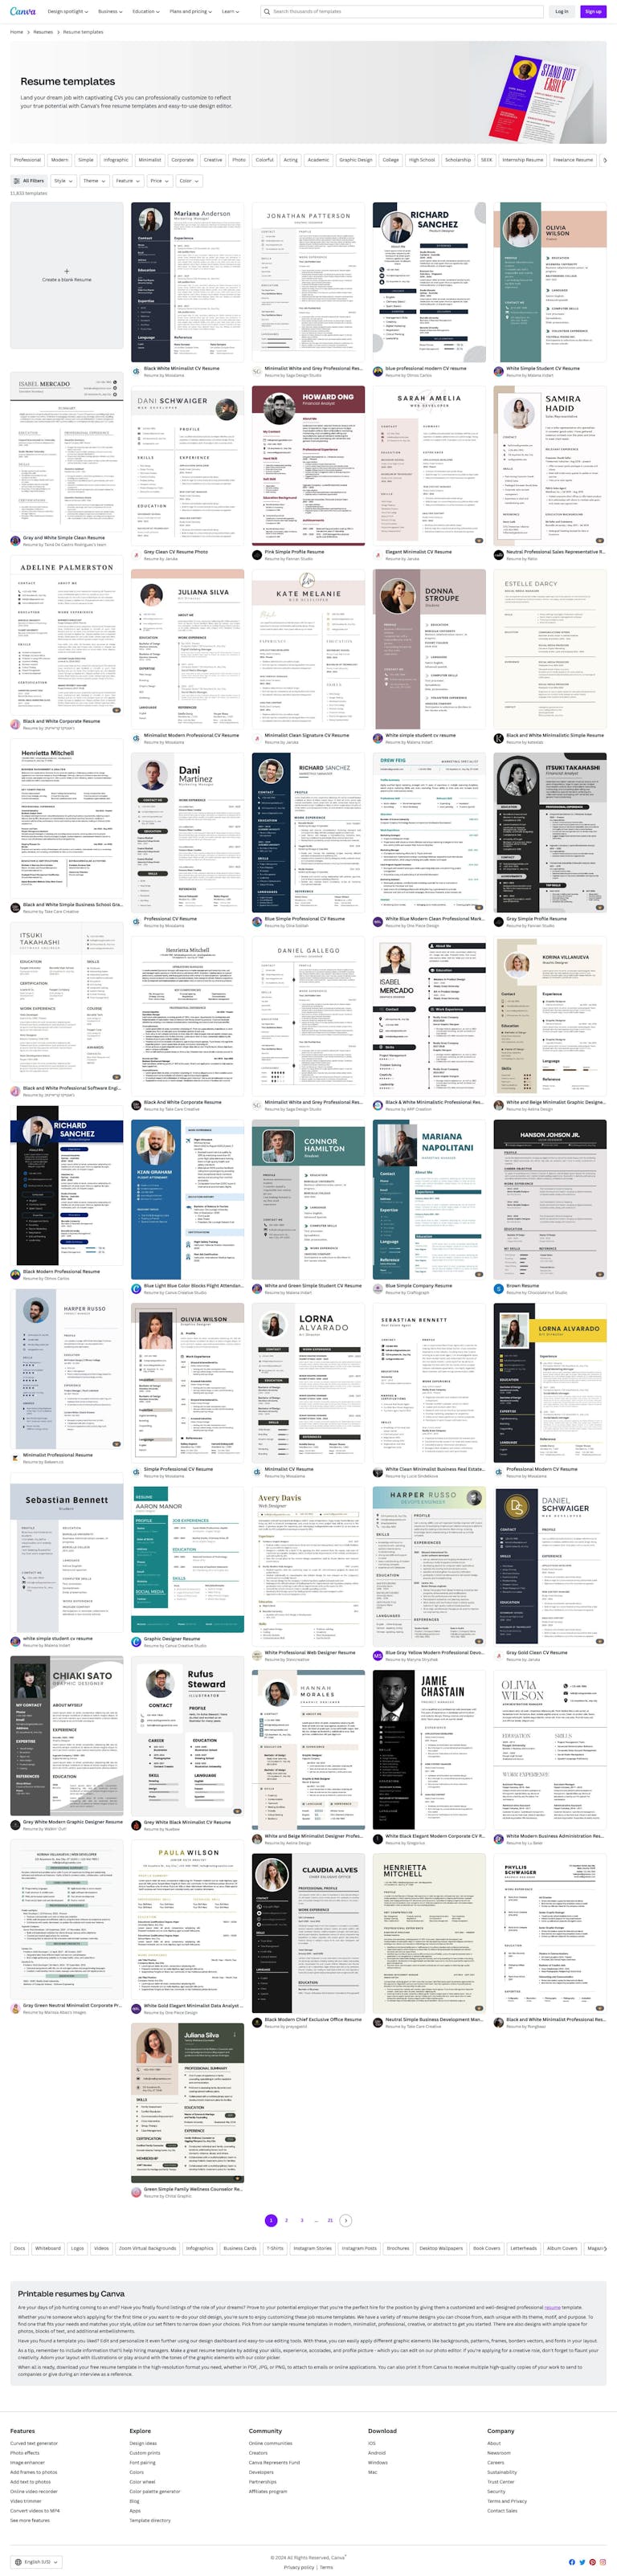 Screenshot of Resume Templates by Canva